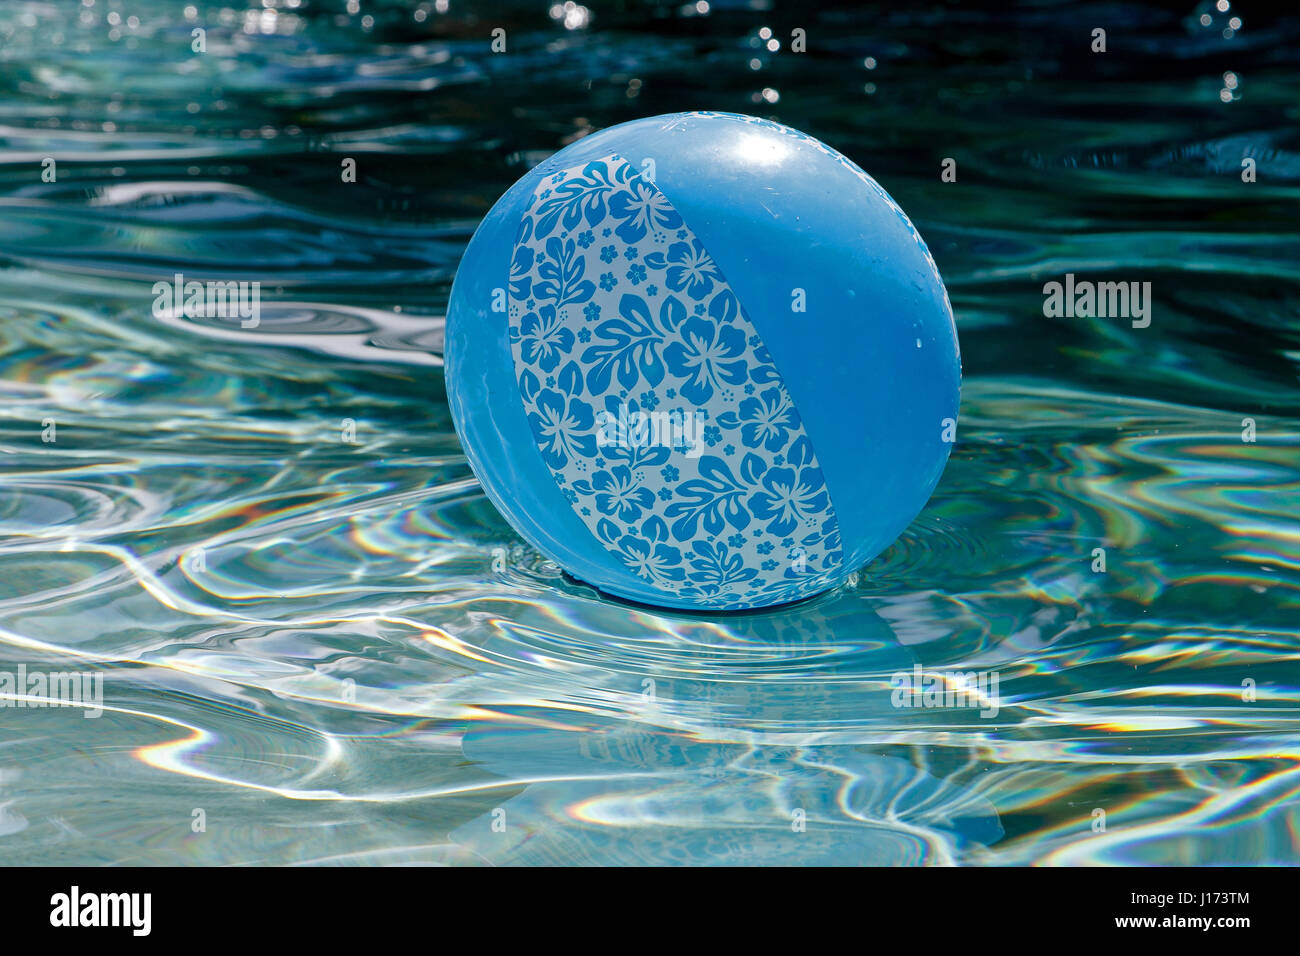 Inflatable blue ball is floating in a pool. Stock Photo